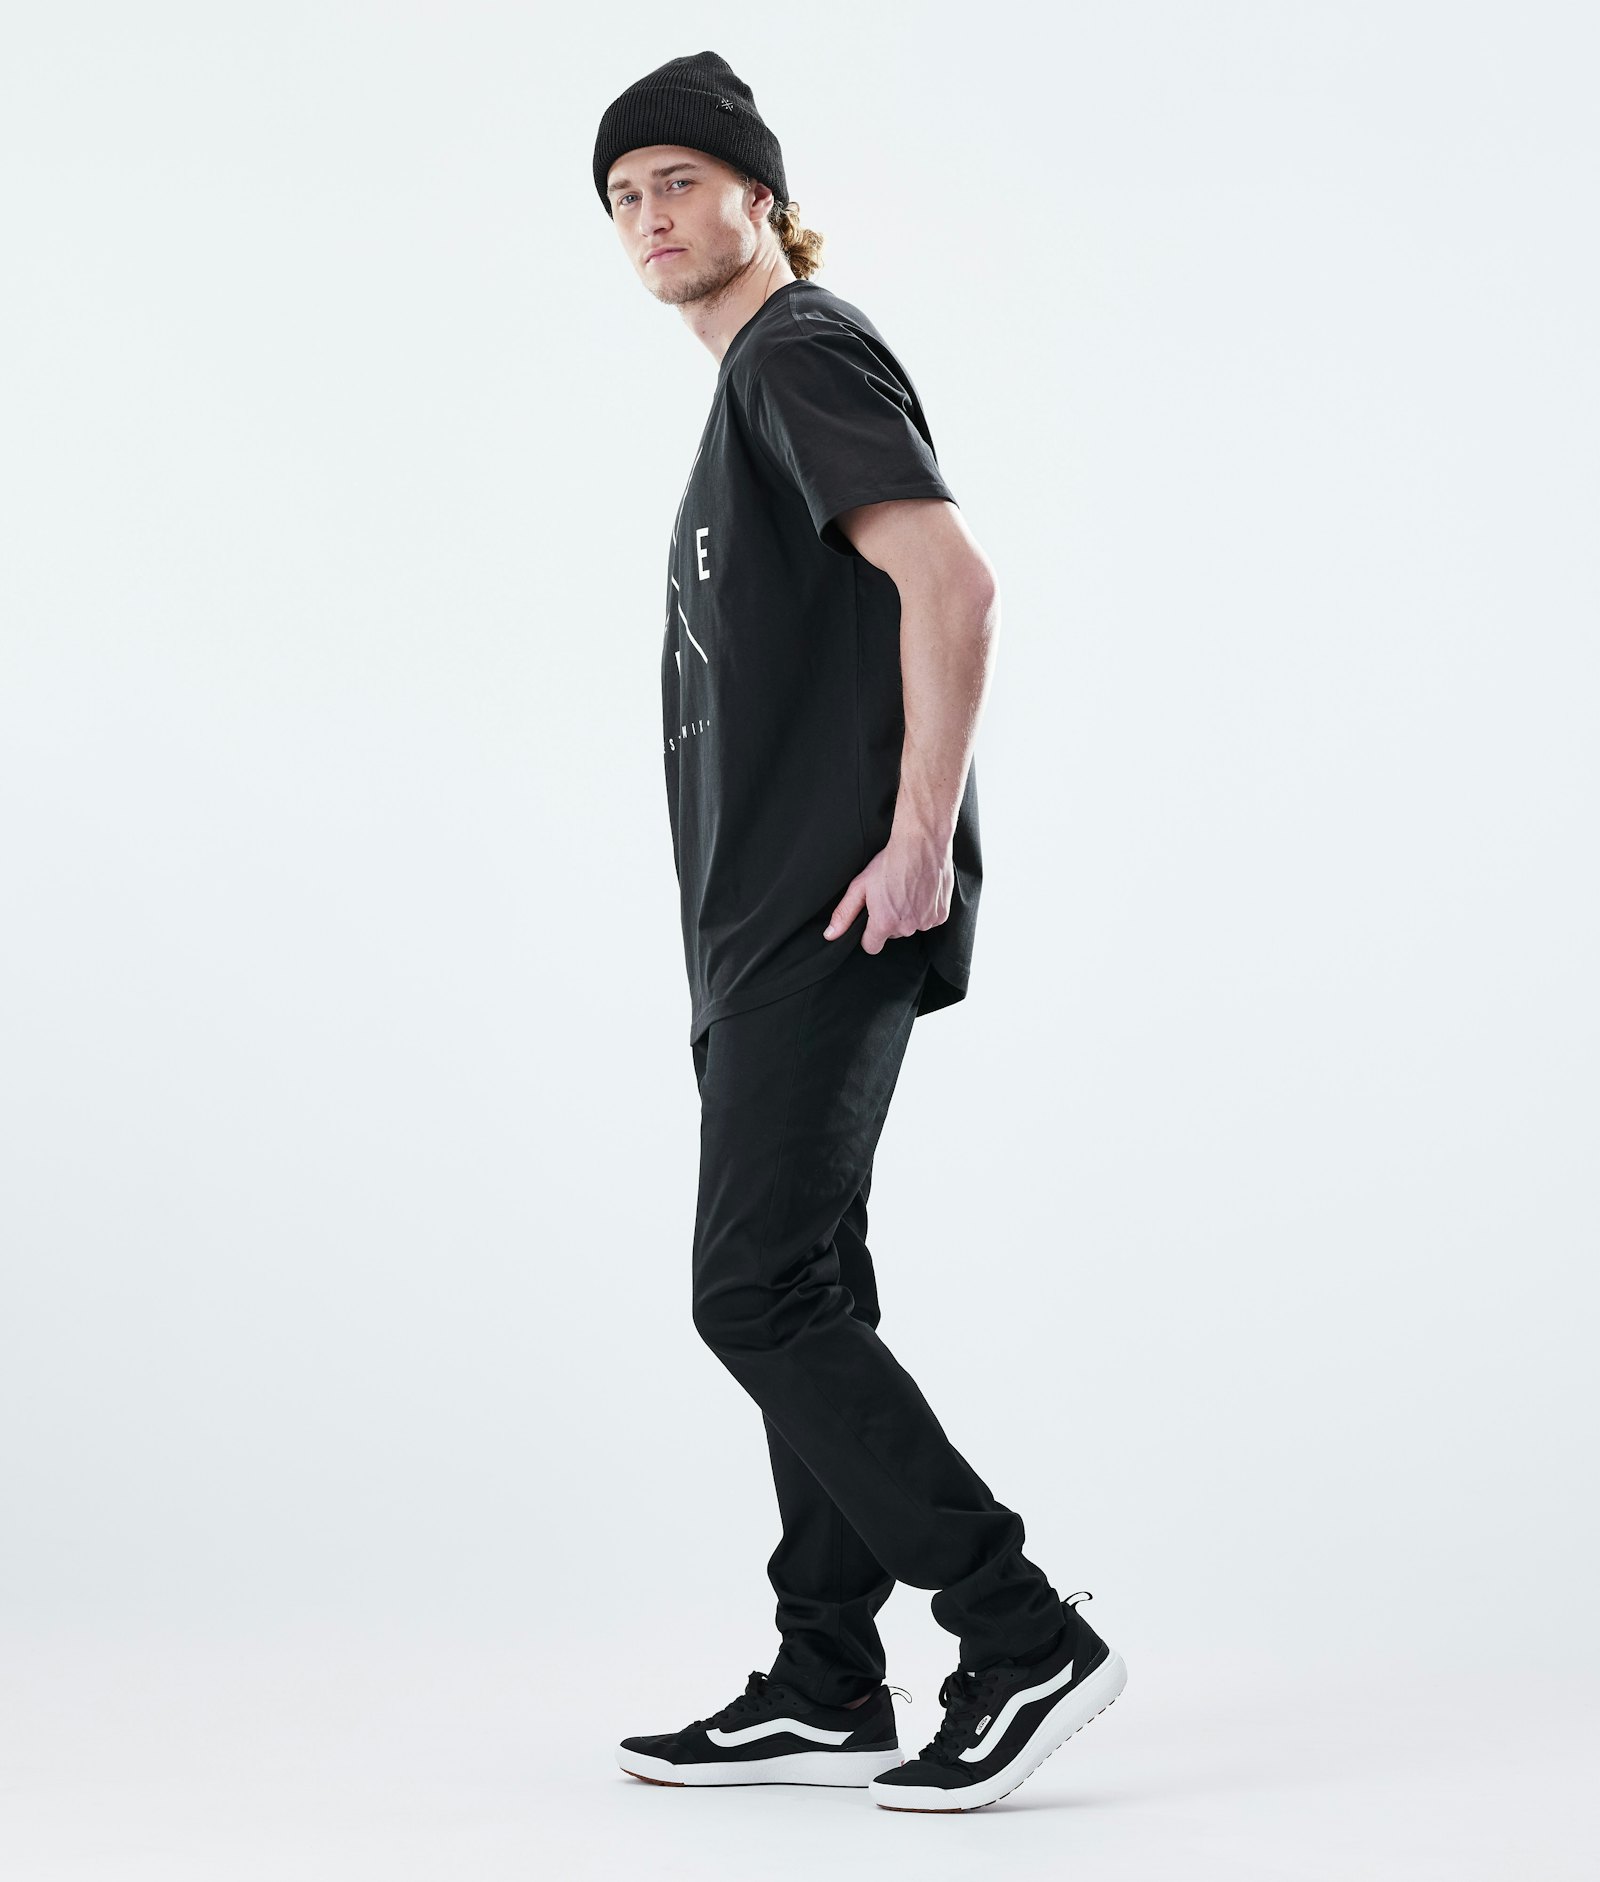 Dope Daily T-shirt Homme 2X-UP Black